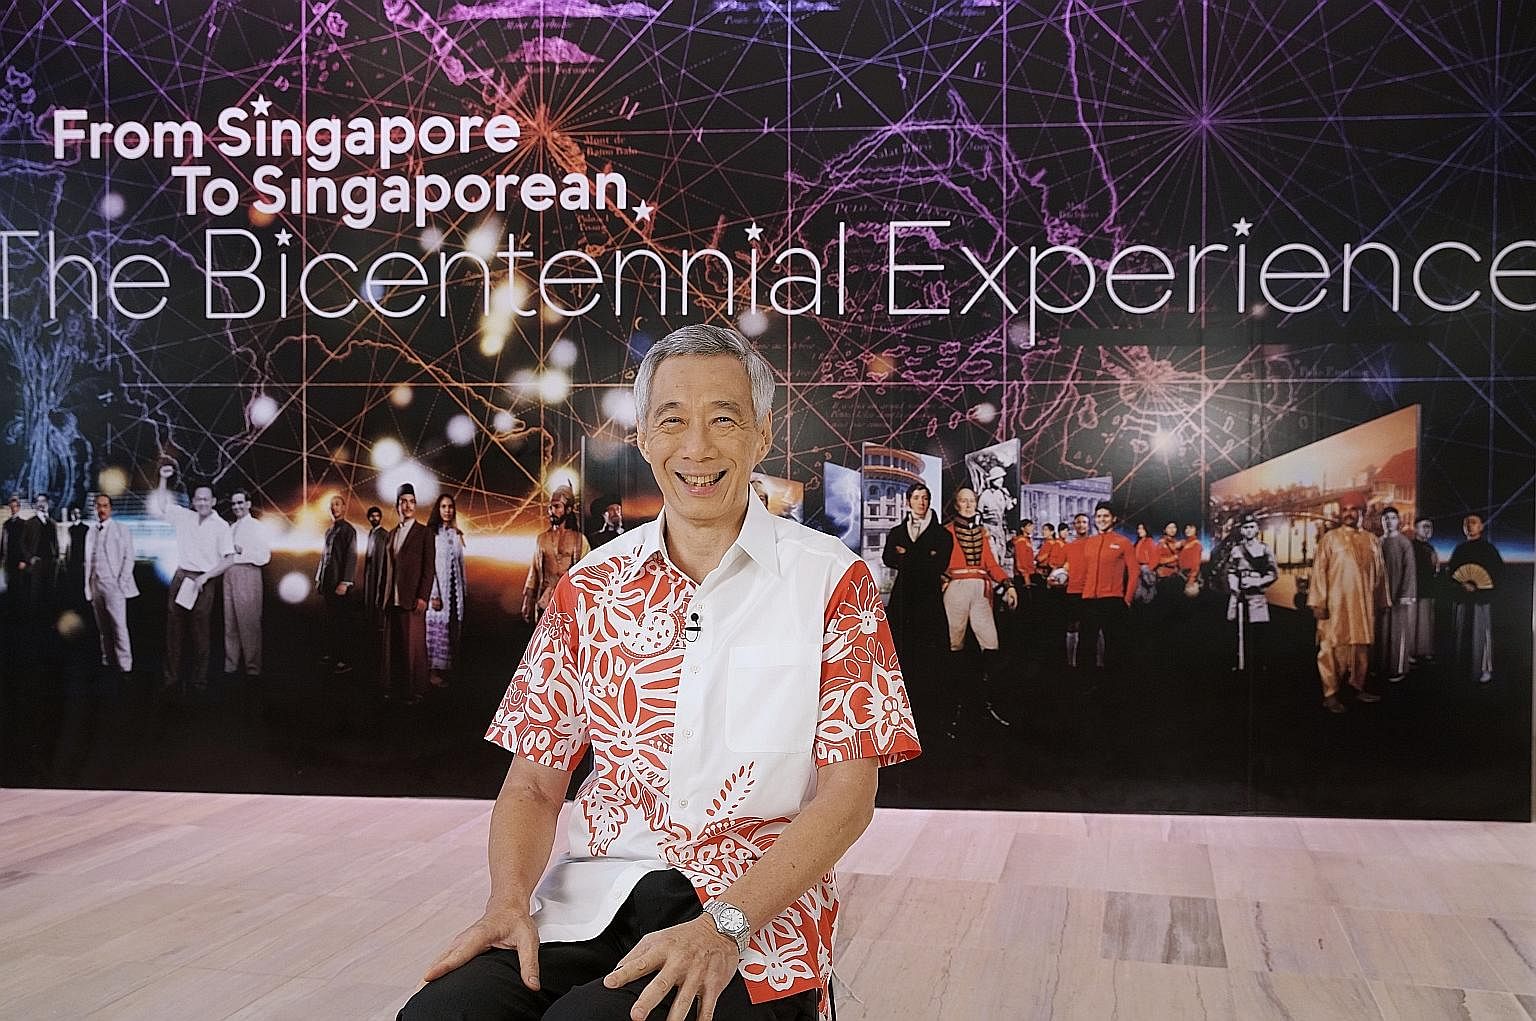 In his New Year Message 2020 recorded at The Bicentennial Experience at Fort Canning, Prime Minister Lee Hsien Loong said: "There can be no guarantee of success. But there never was, at any time during our history. As before, every step forward will 